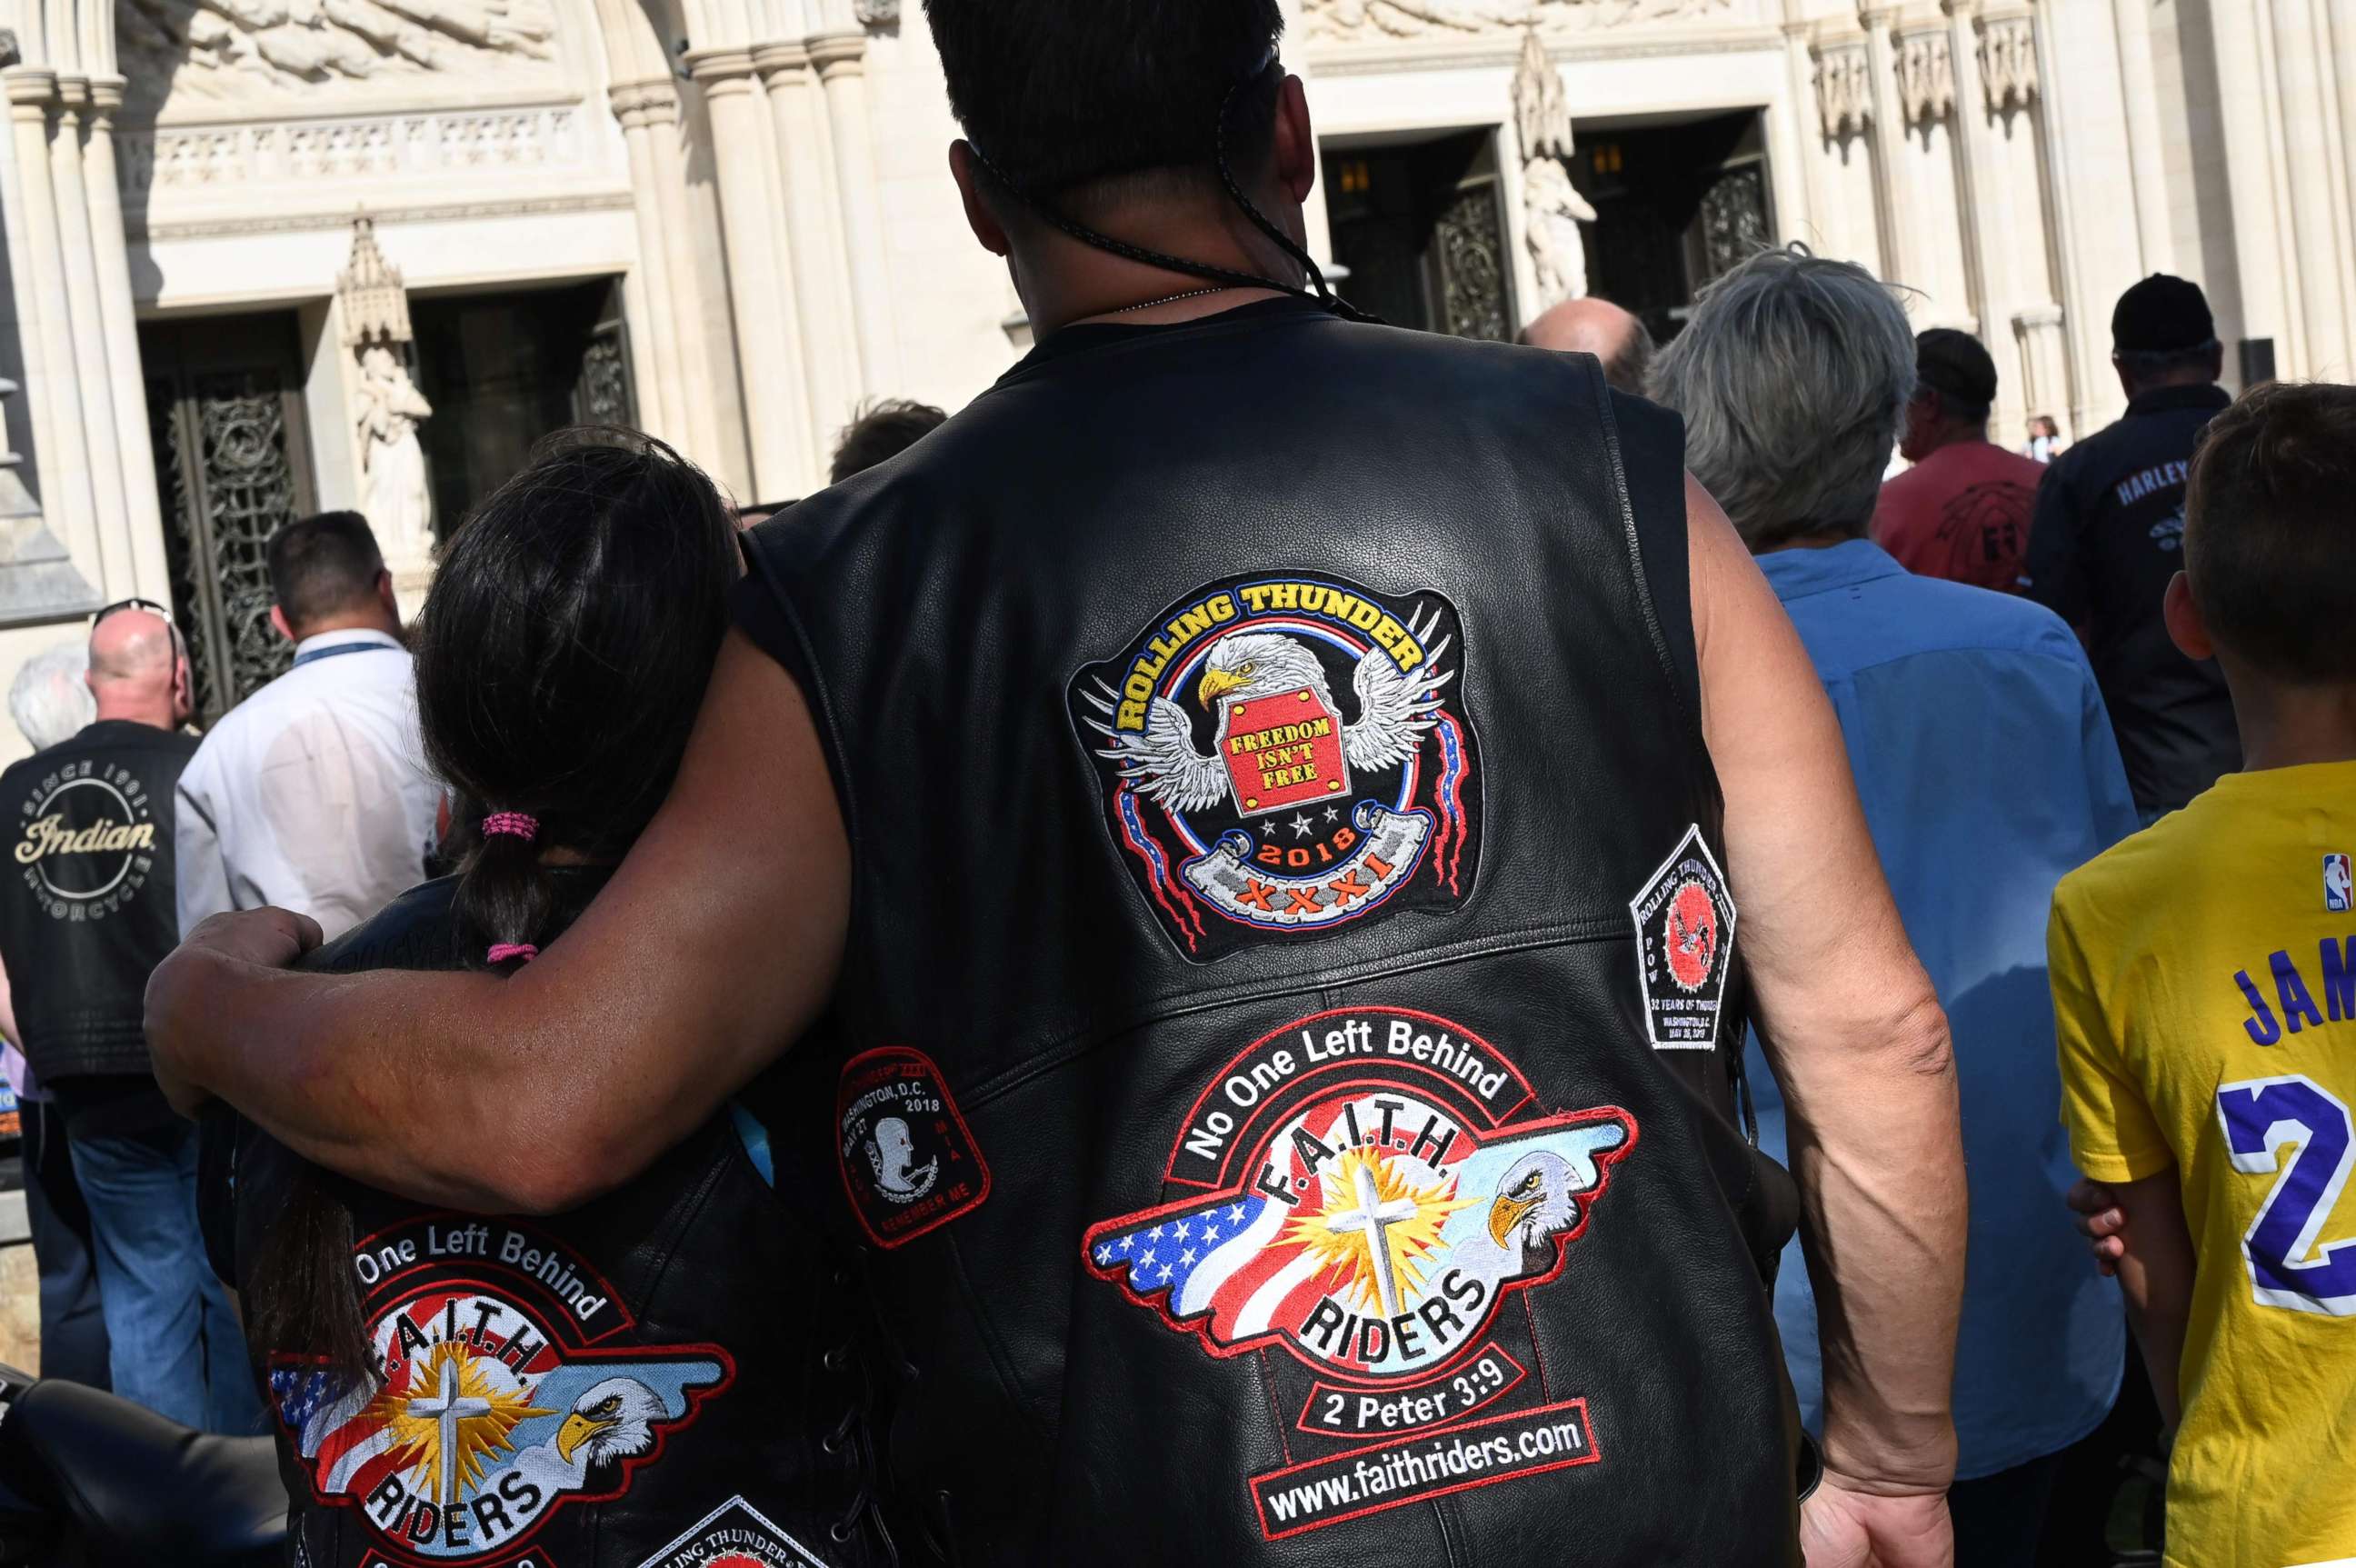 PHOTO: Motorcyclists are watching Clergyman Rev. Andrew K. Barnett perform the "Blessing of the Bikes" at the Washington National Cathedral, May 24, 2019, in Washington, D.C. 